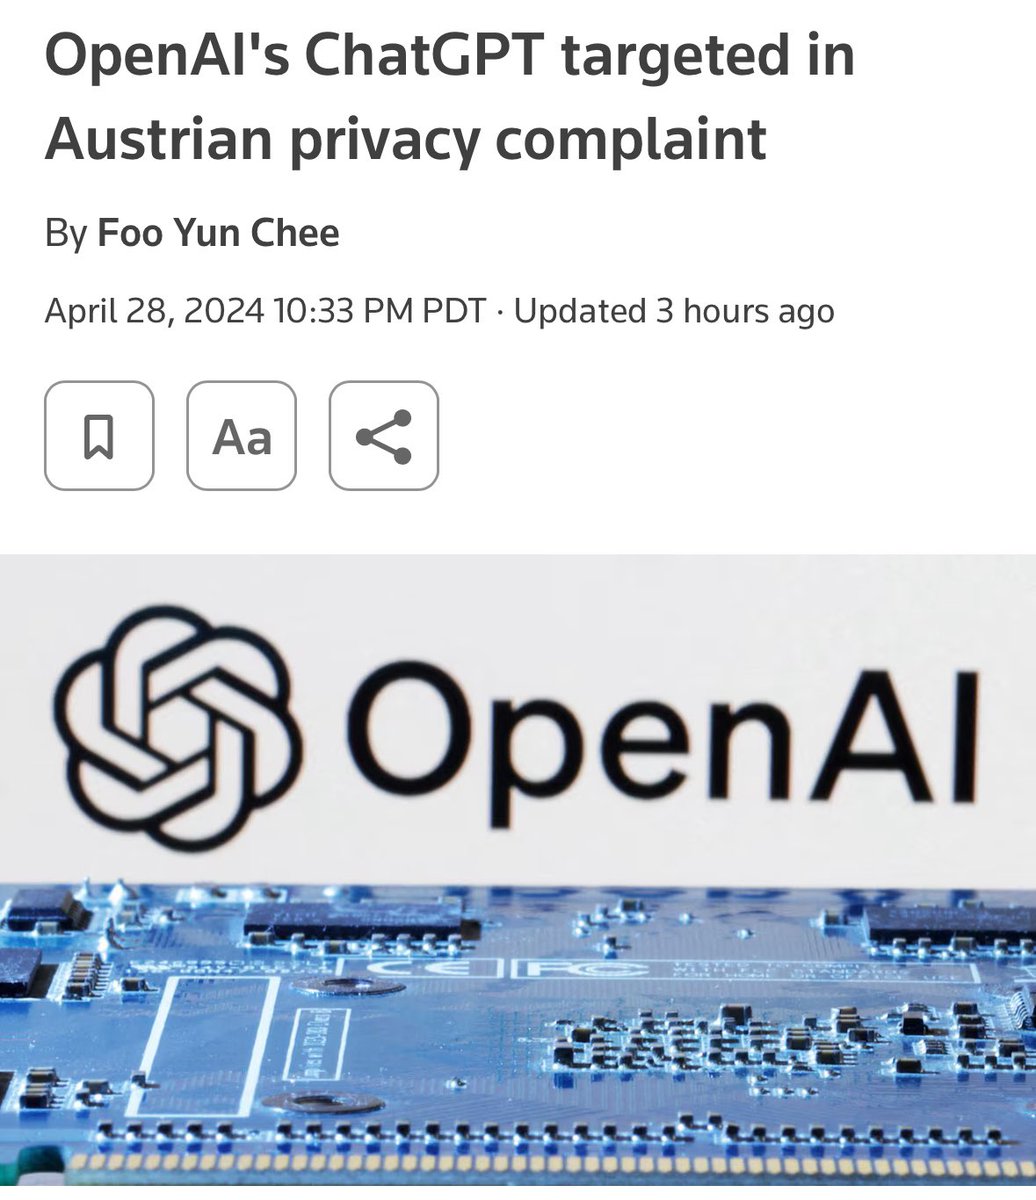 OpenAI targeted because:
“NOYB said the complainant in its case, who is also a public figure, asked ChatGPT about his birthday and was repeatedly provided incorrect information instead of the chatbot telling users that it does not have the necessary data.”